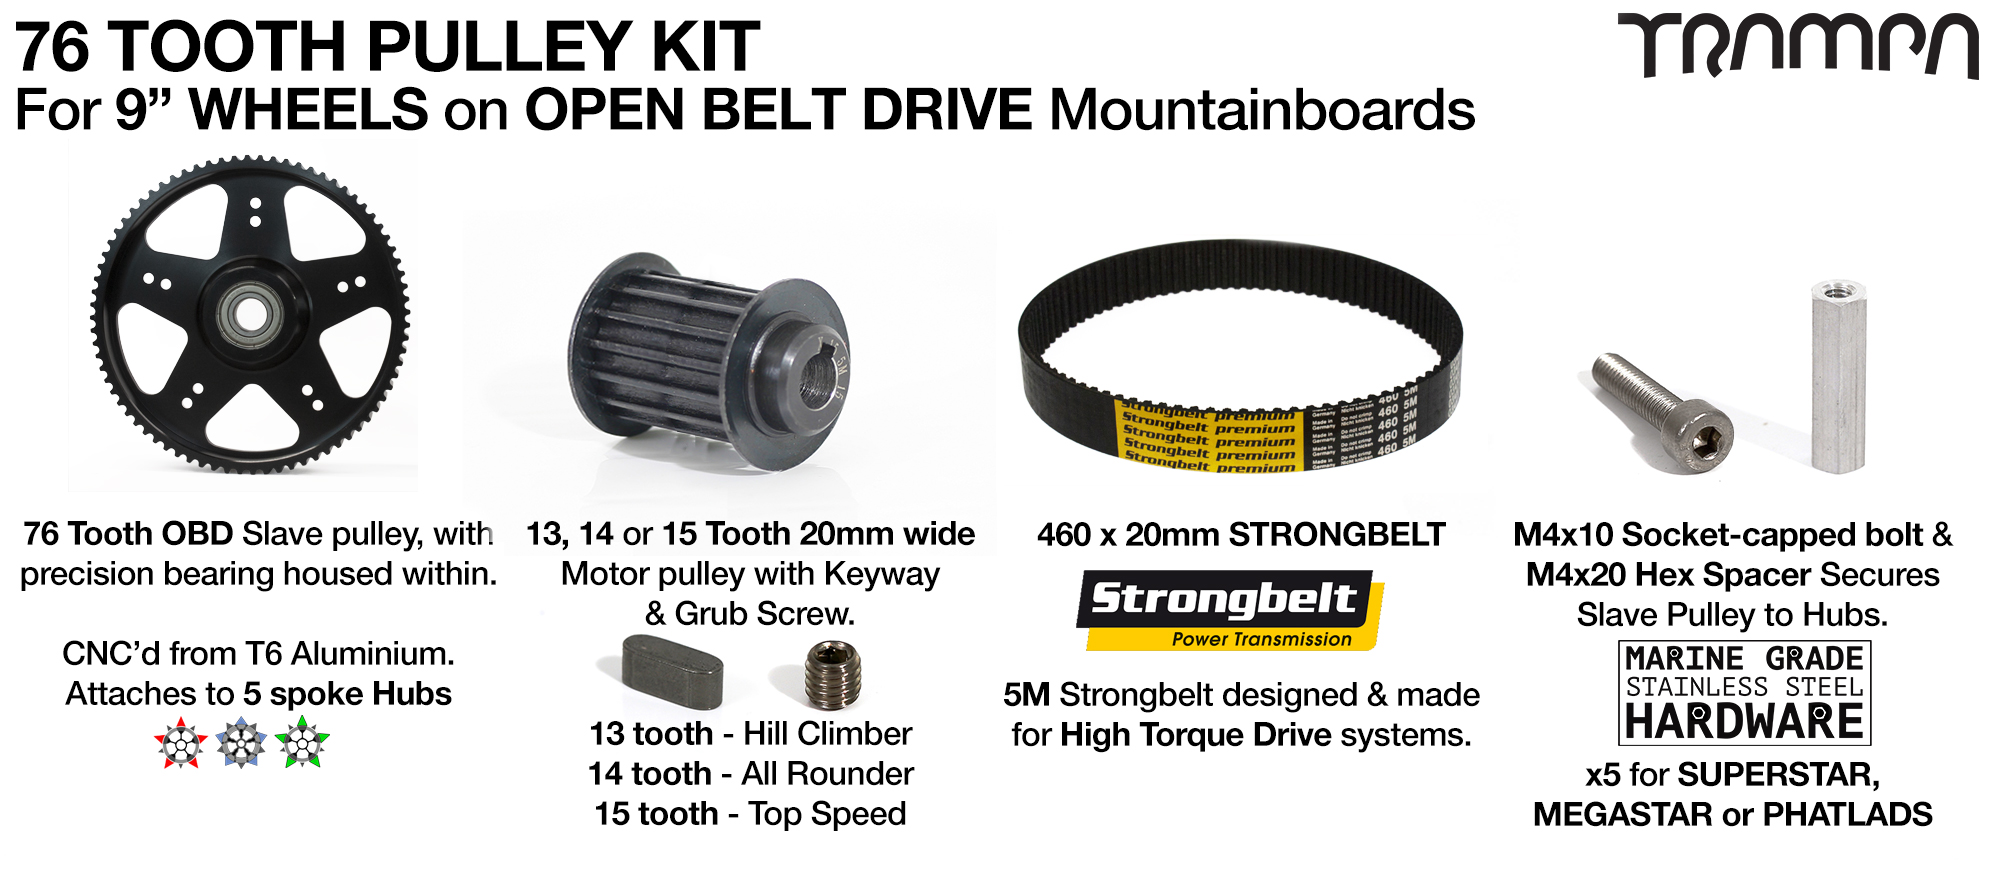 76T OBD Panel with 9 Inch Wheels - 76 Tooth Pulley Kit & 460 x 20mm Belt 